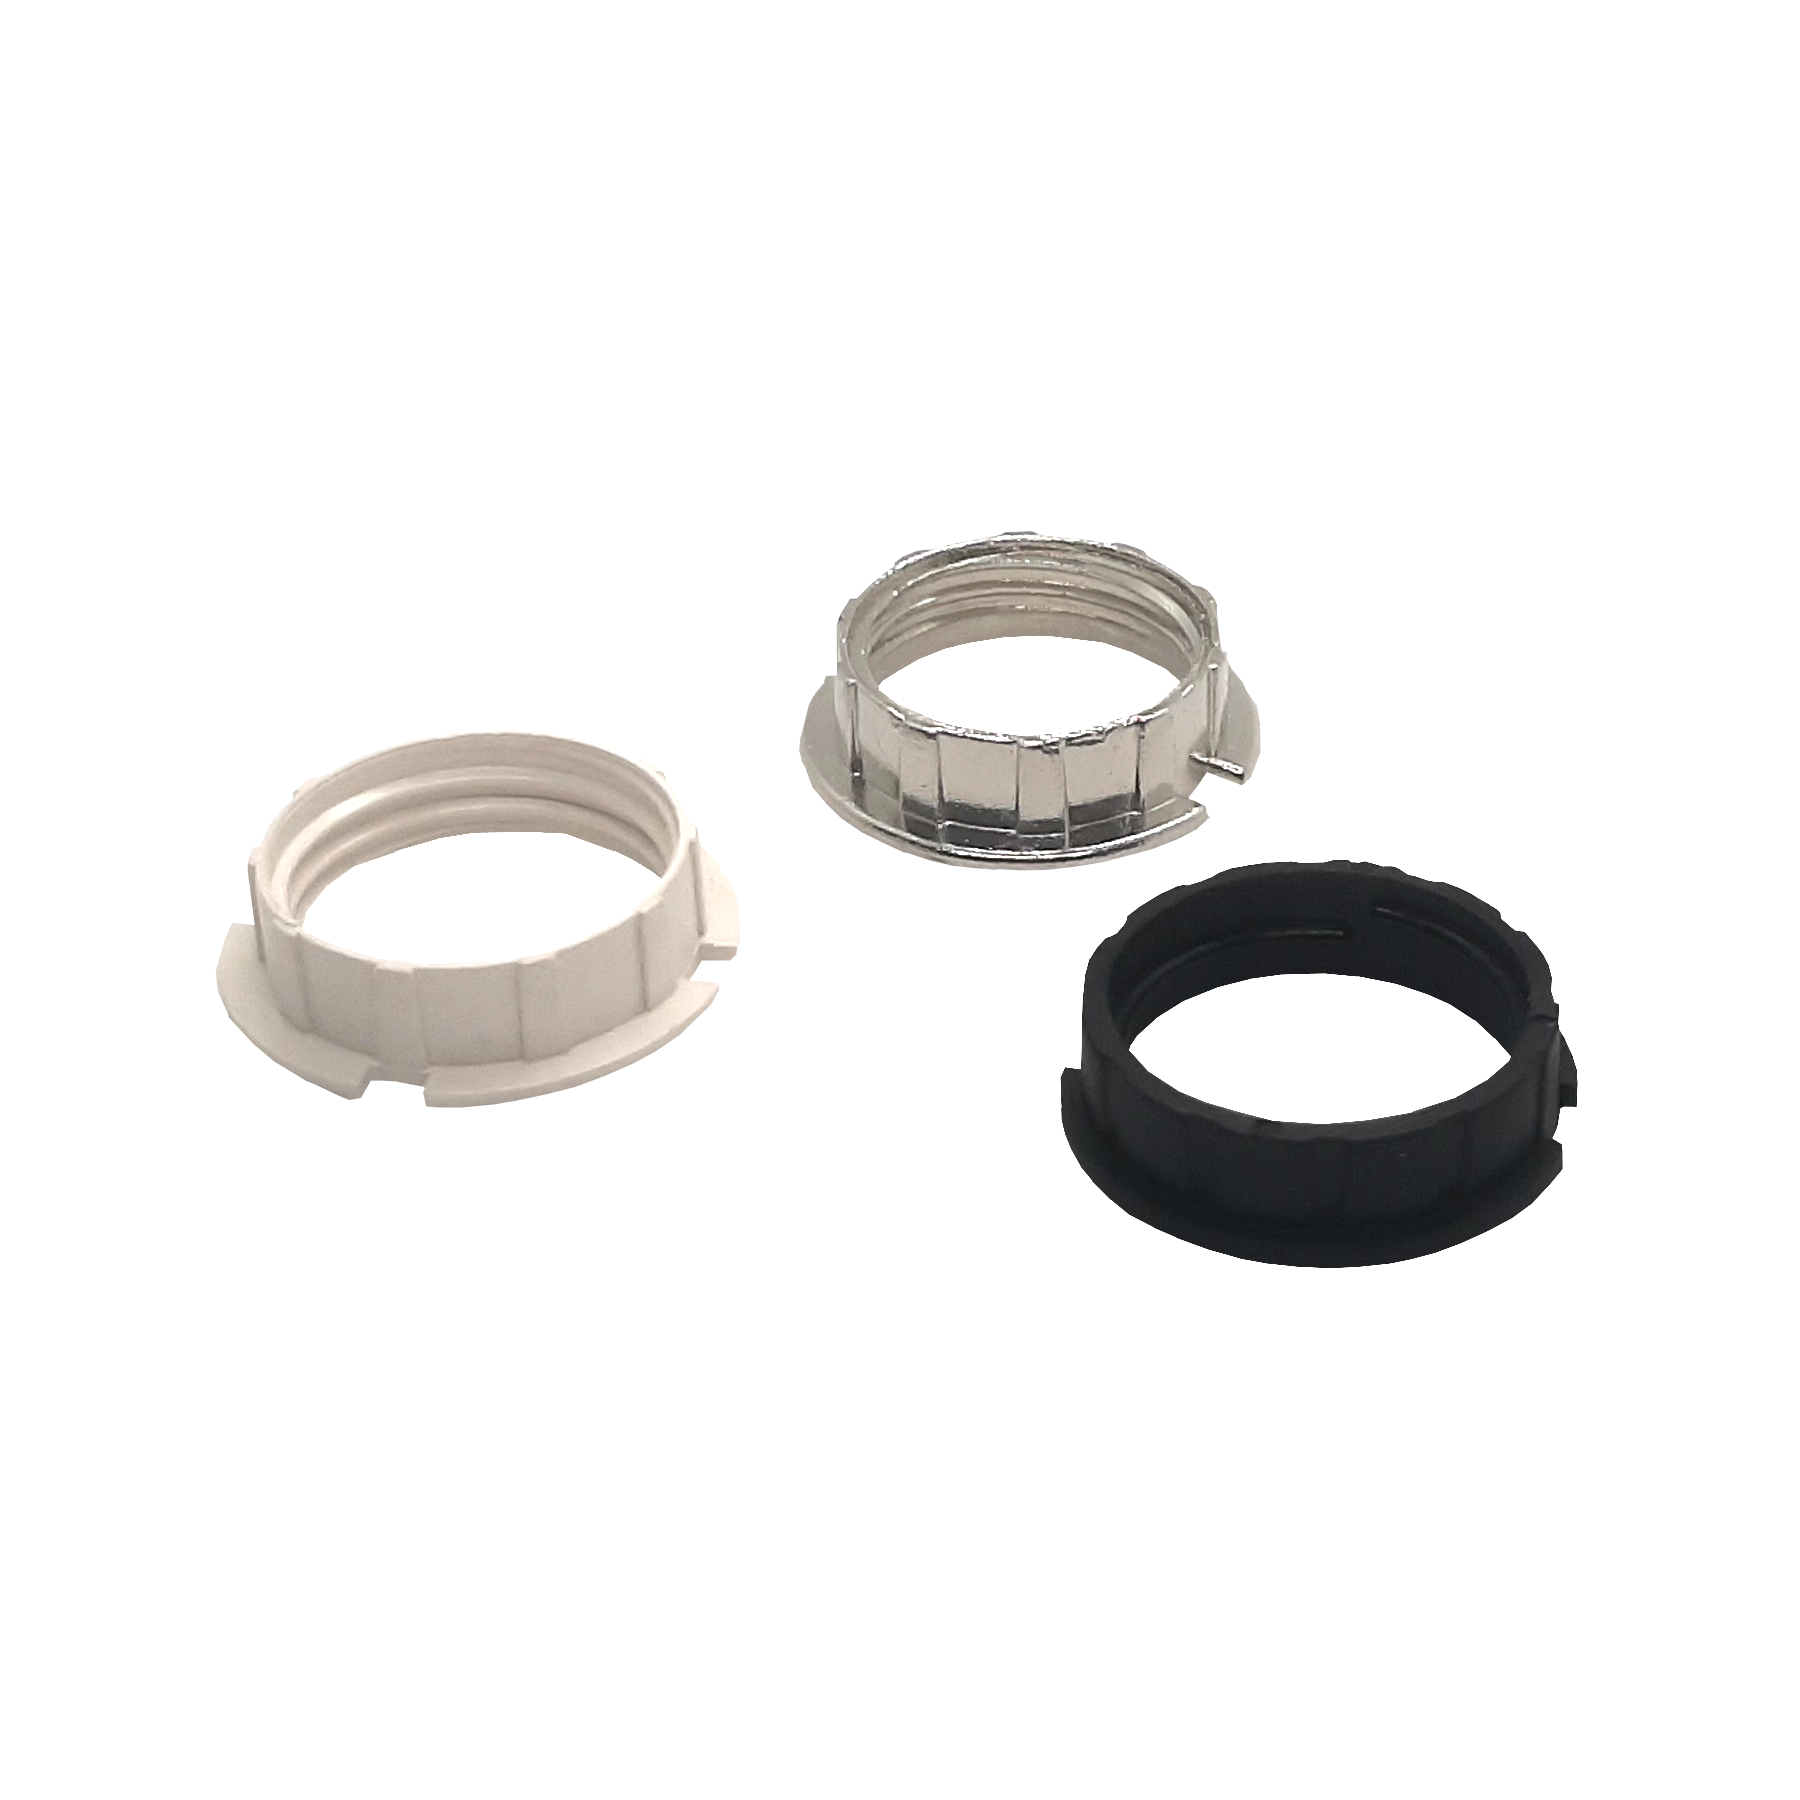 Product image of Lampholder G9 Skirt Ring showing all 3 colours, black, chrome and white